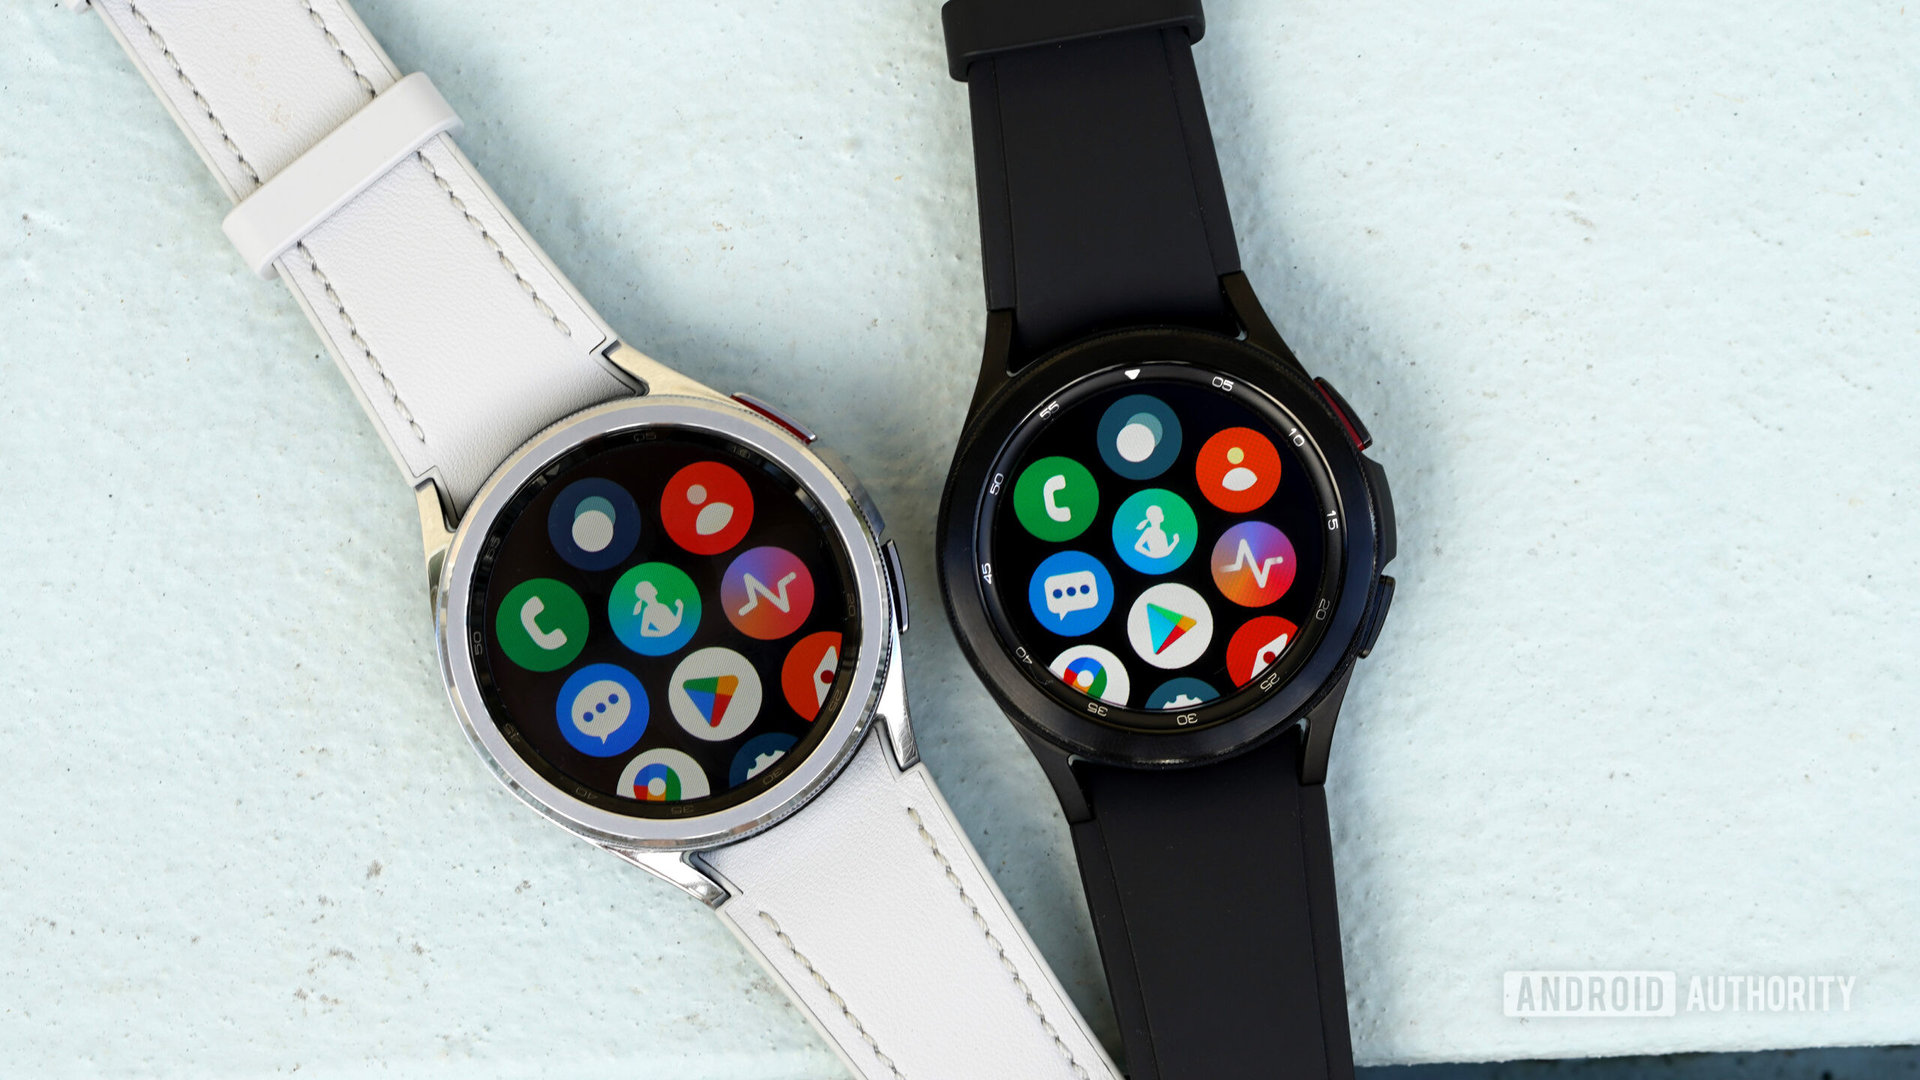 The most recent generations of Samsung Galaxy Watch Classics rest on a blue surface.